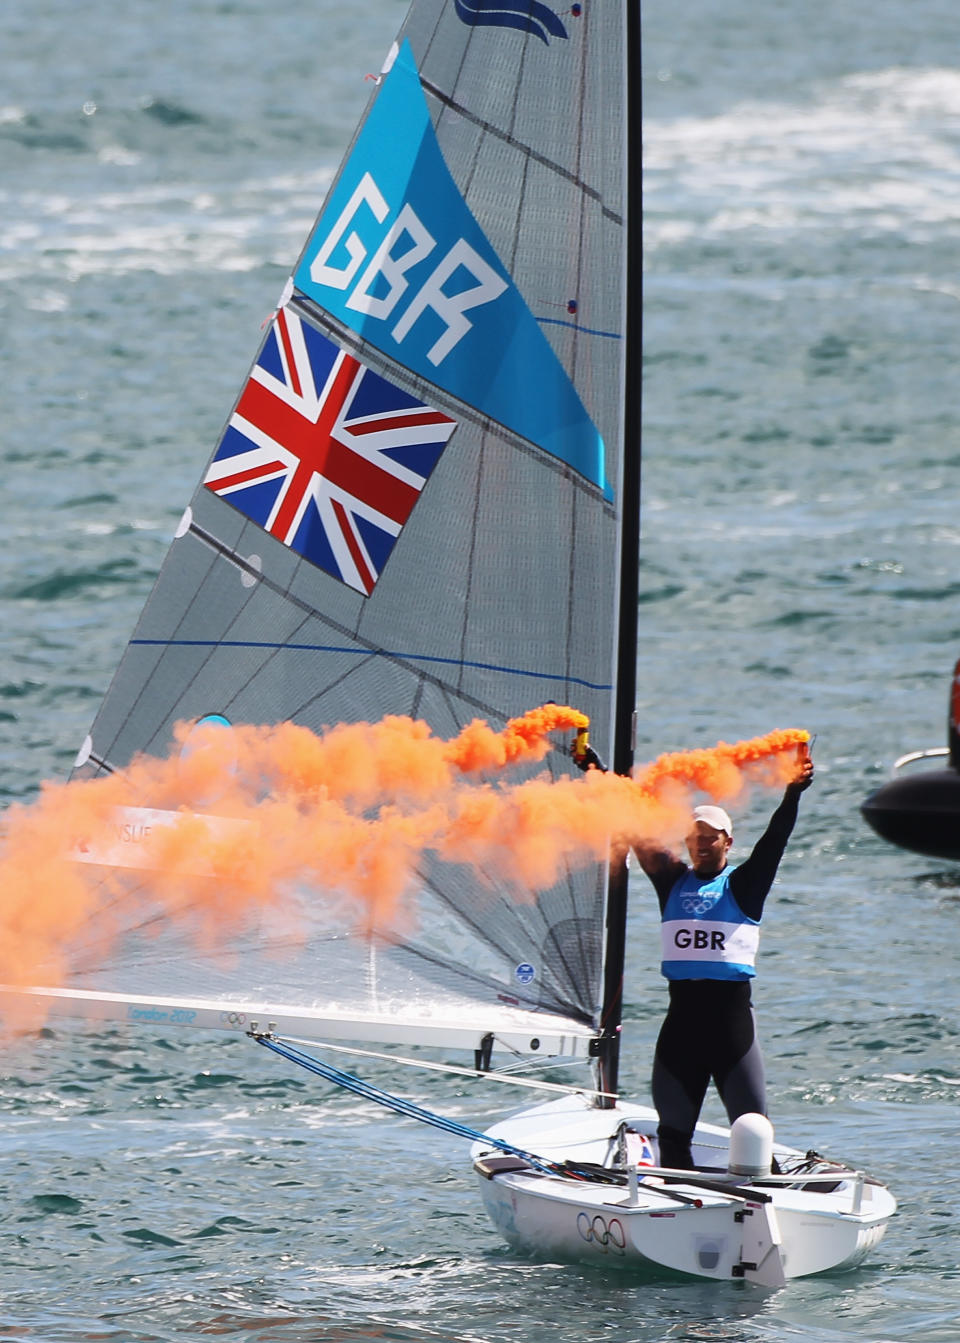 WEYMOUTH, ENGLAND - AUGUST 05: Ben Ainslie of Great Britain celebrates overall victory after competing in the Men's Finn Sailing Medal Race on Day 9 of the London 2012 Olympic Games at the Weymouth & Portland Venue at Weymouth Harbour on August 5, 2012 in Weymouth, England. (Photo by Getty Images)